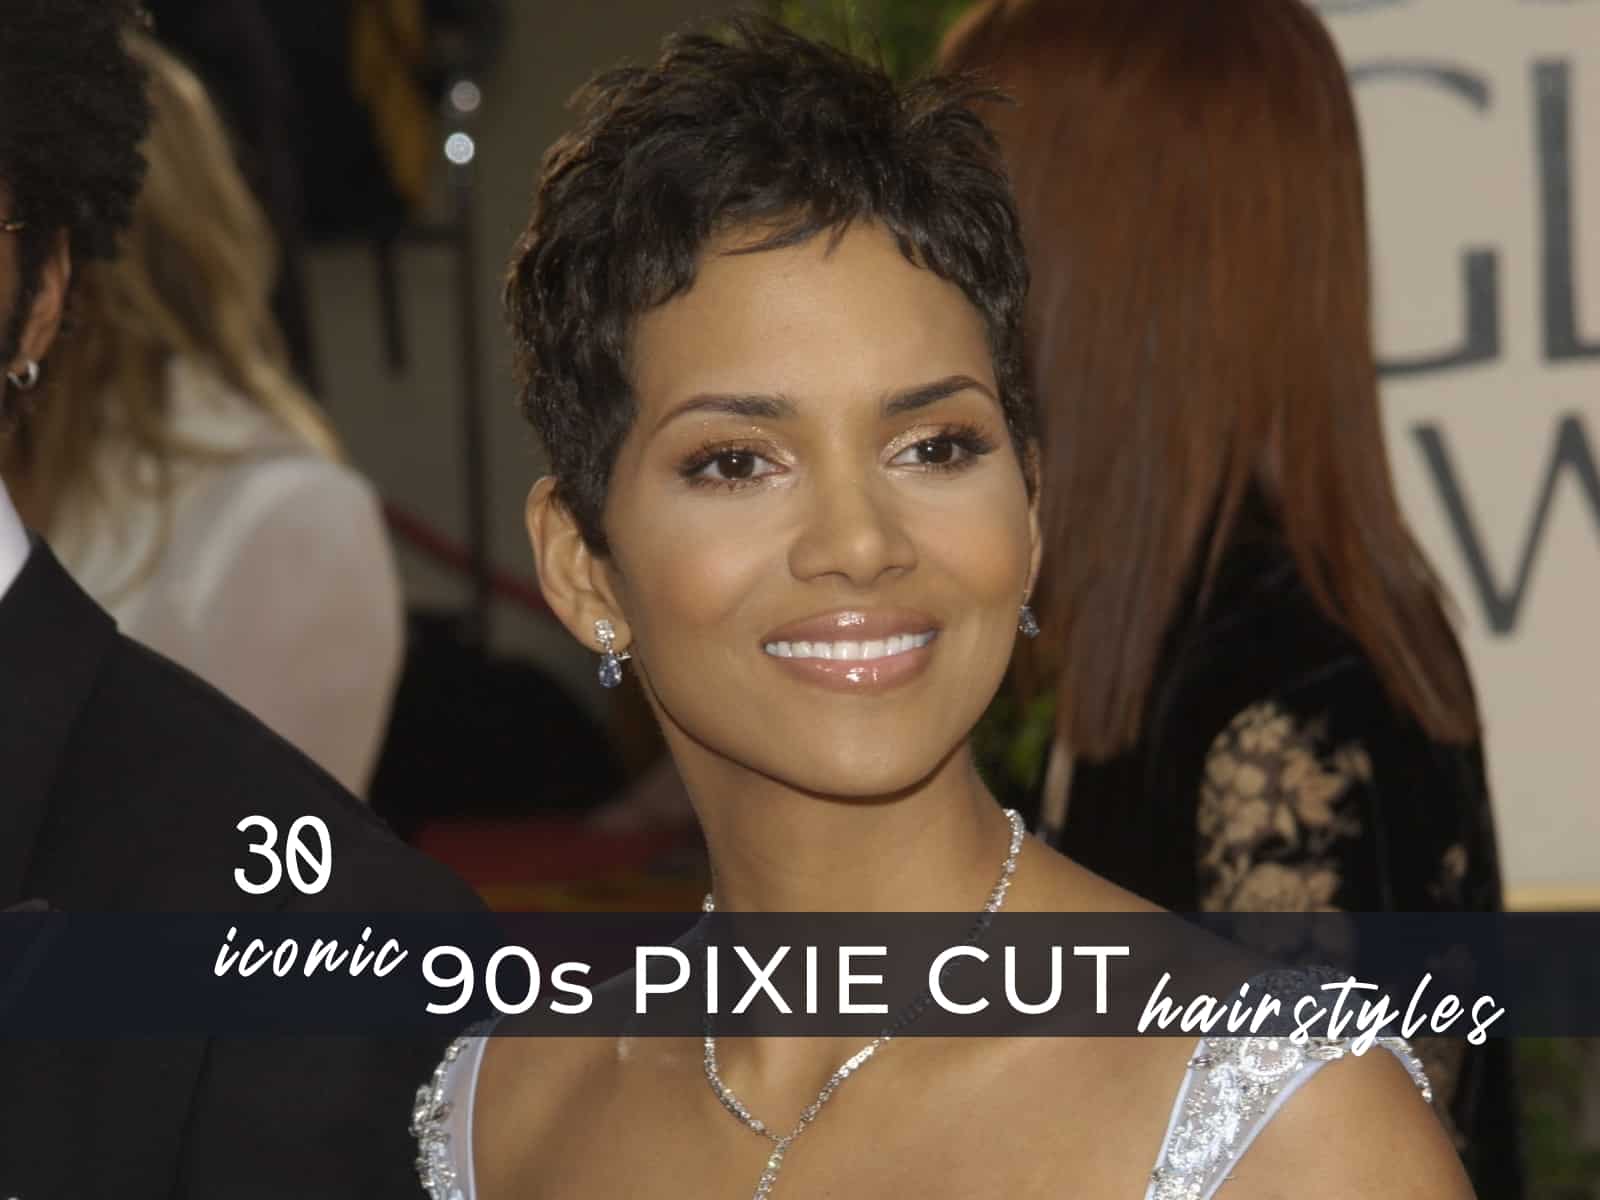 30 Iconic 90s Pixie Cut Hairstyles That Are Back In Fashion